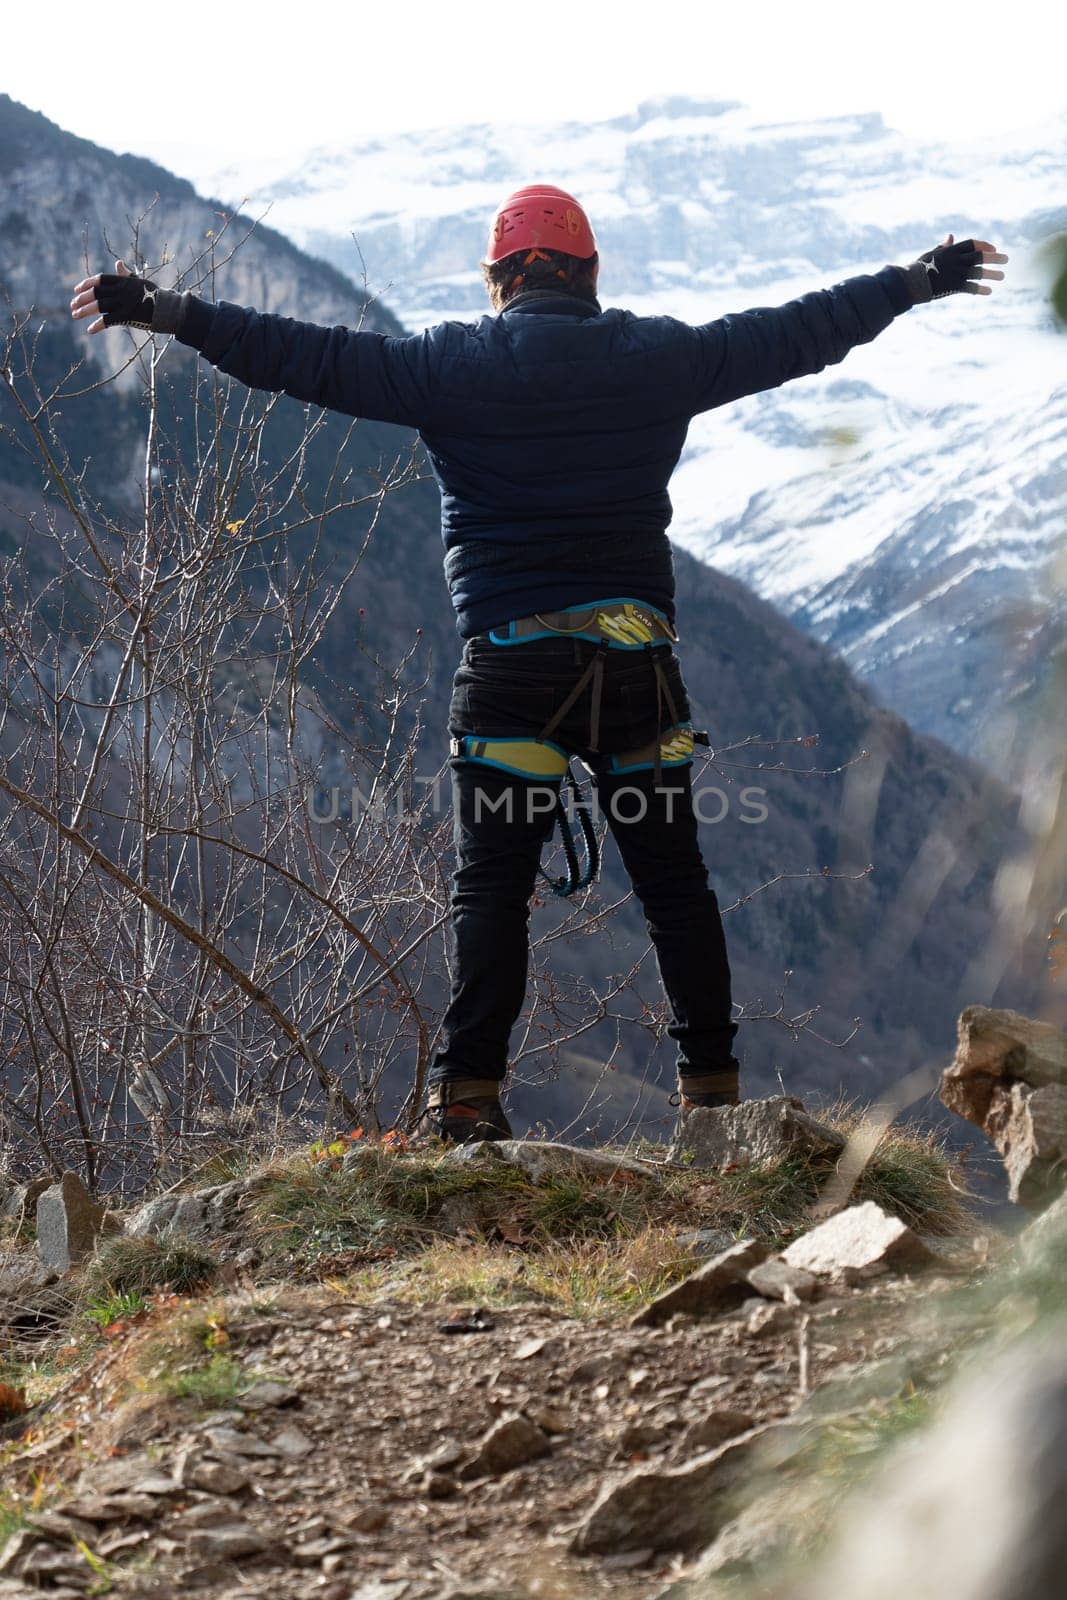 Man in body harnesses feature life-safety, viaferrata in mountains of pyrenees by FreeProd